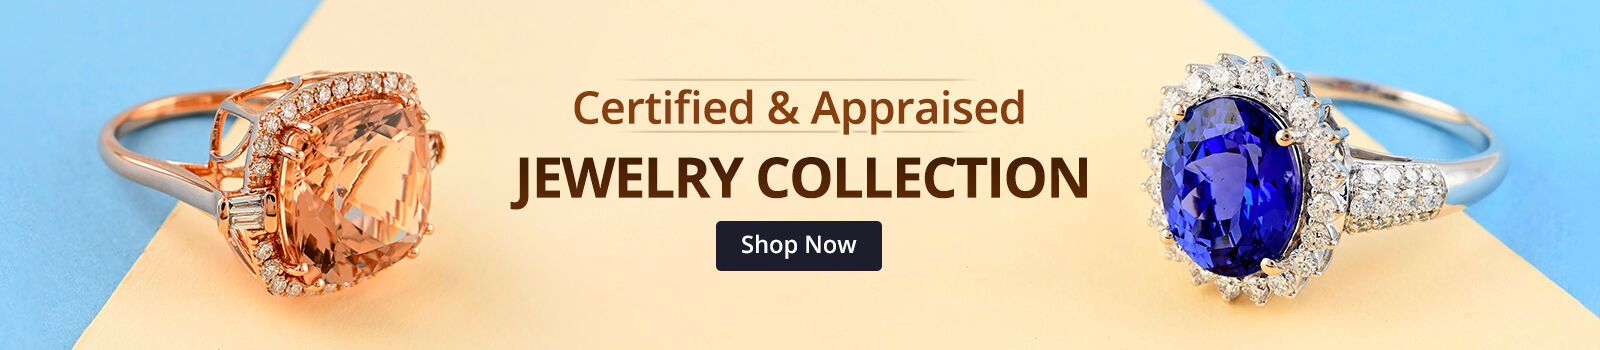 Certified & Appraised Jewelry Collection